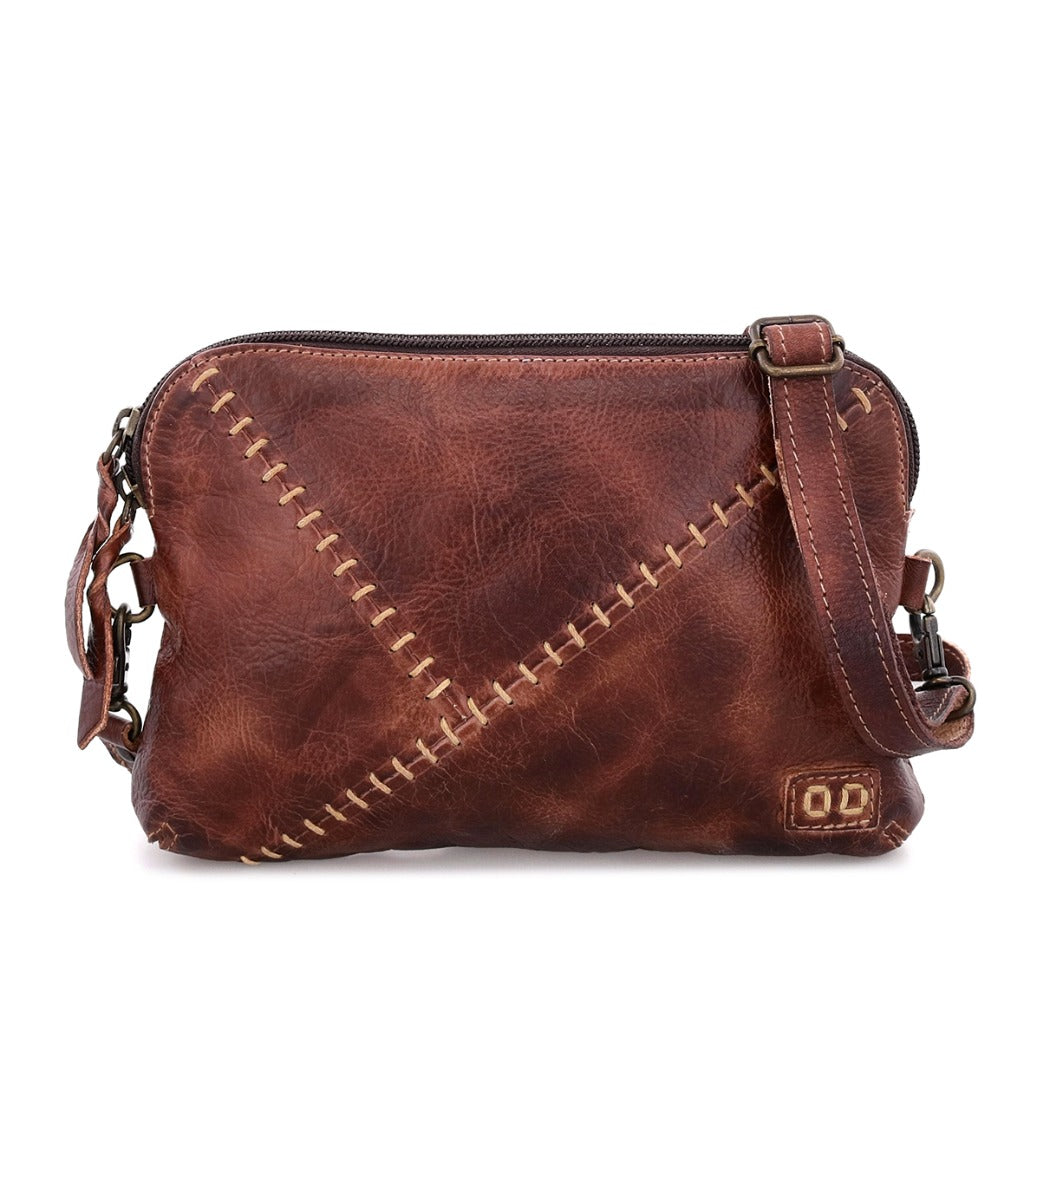 A brown leather Magdalene crossbody bag with stitched details by Bed Stu.